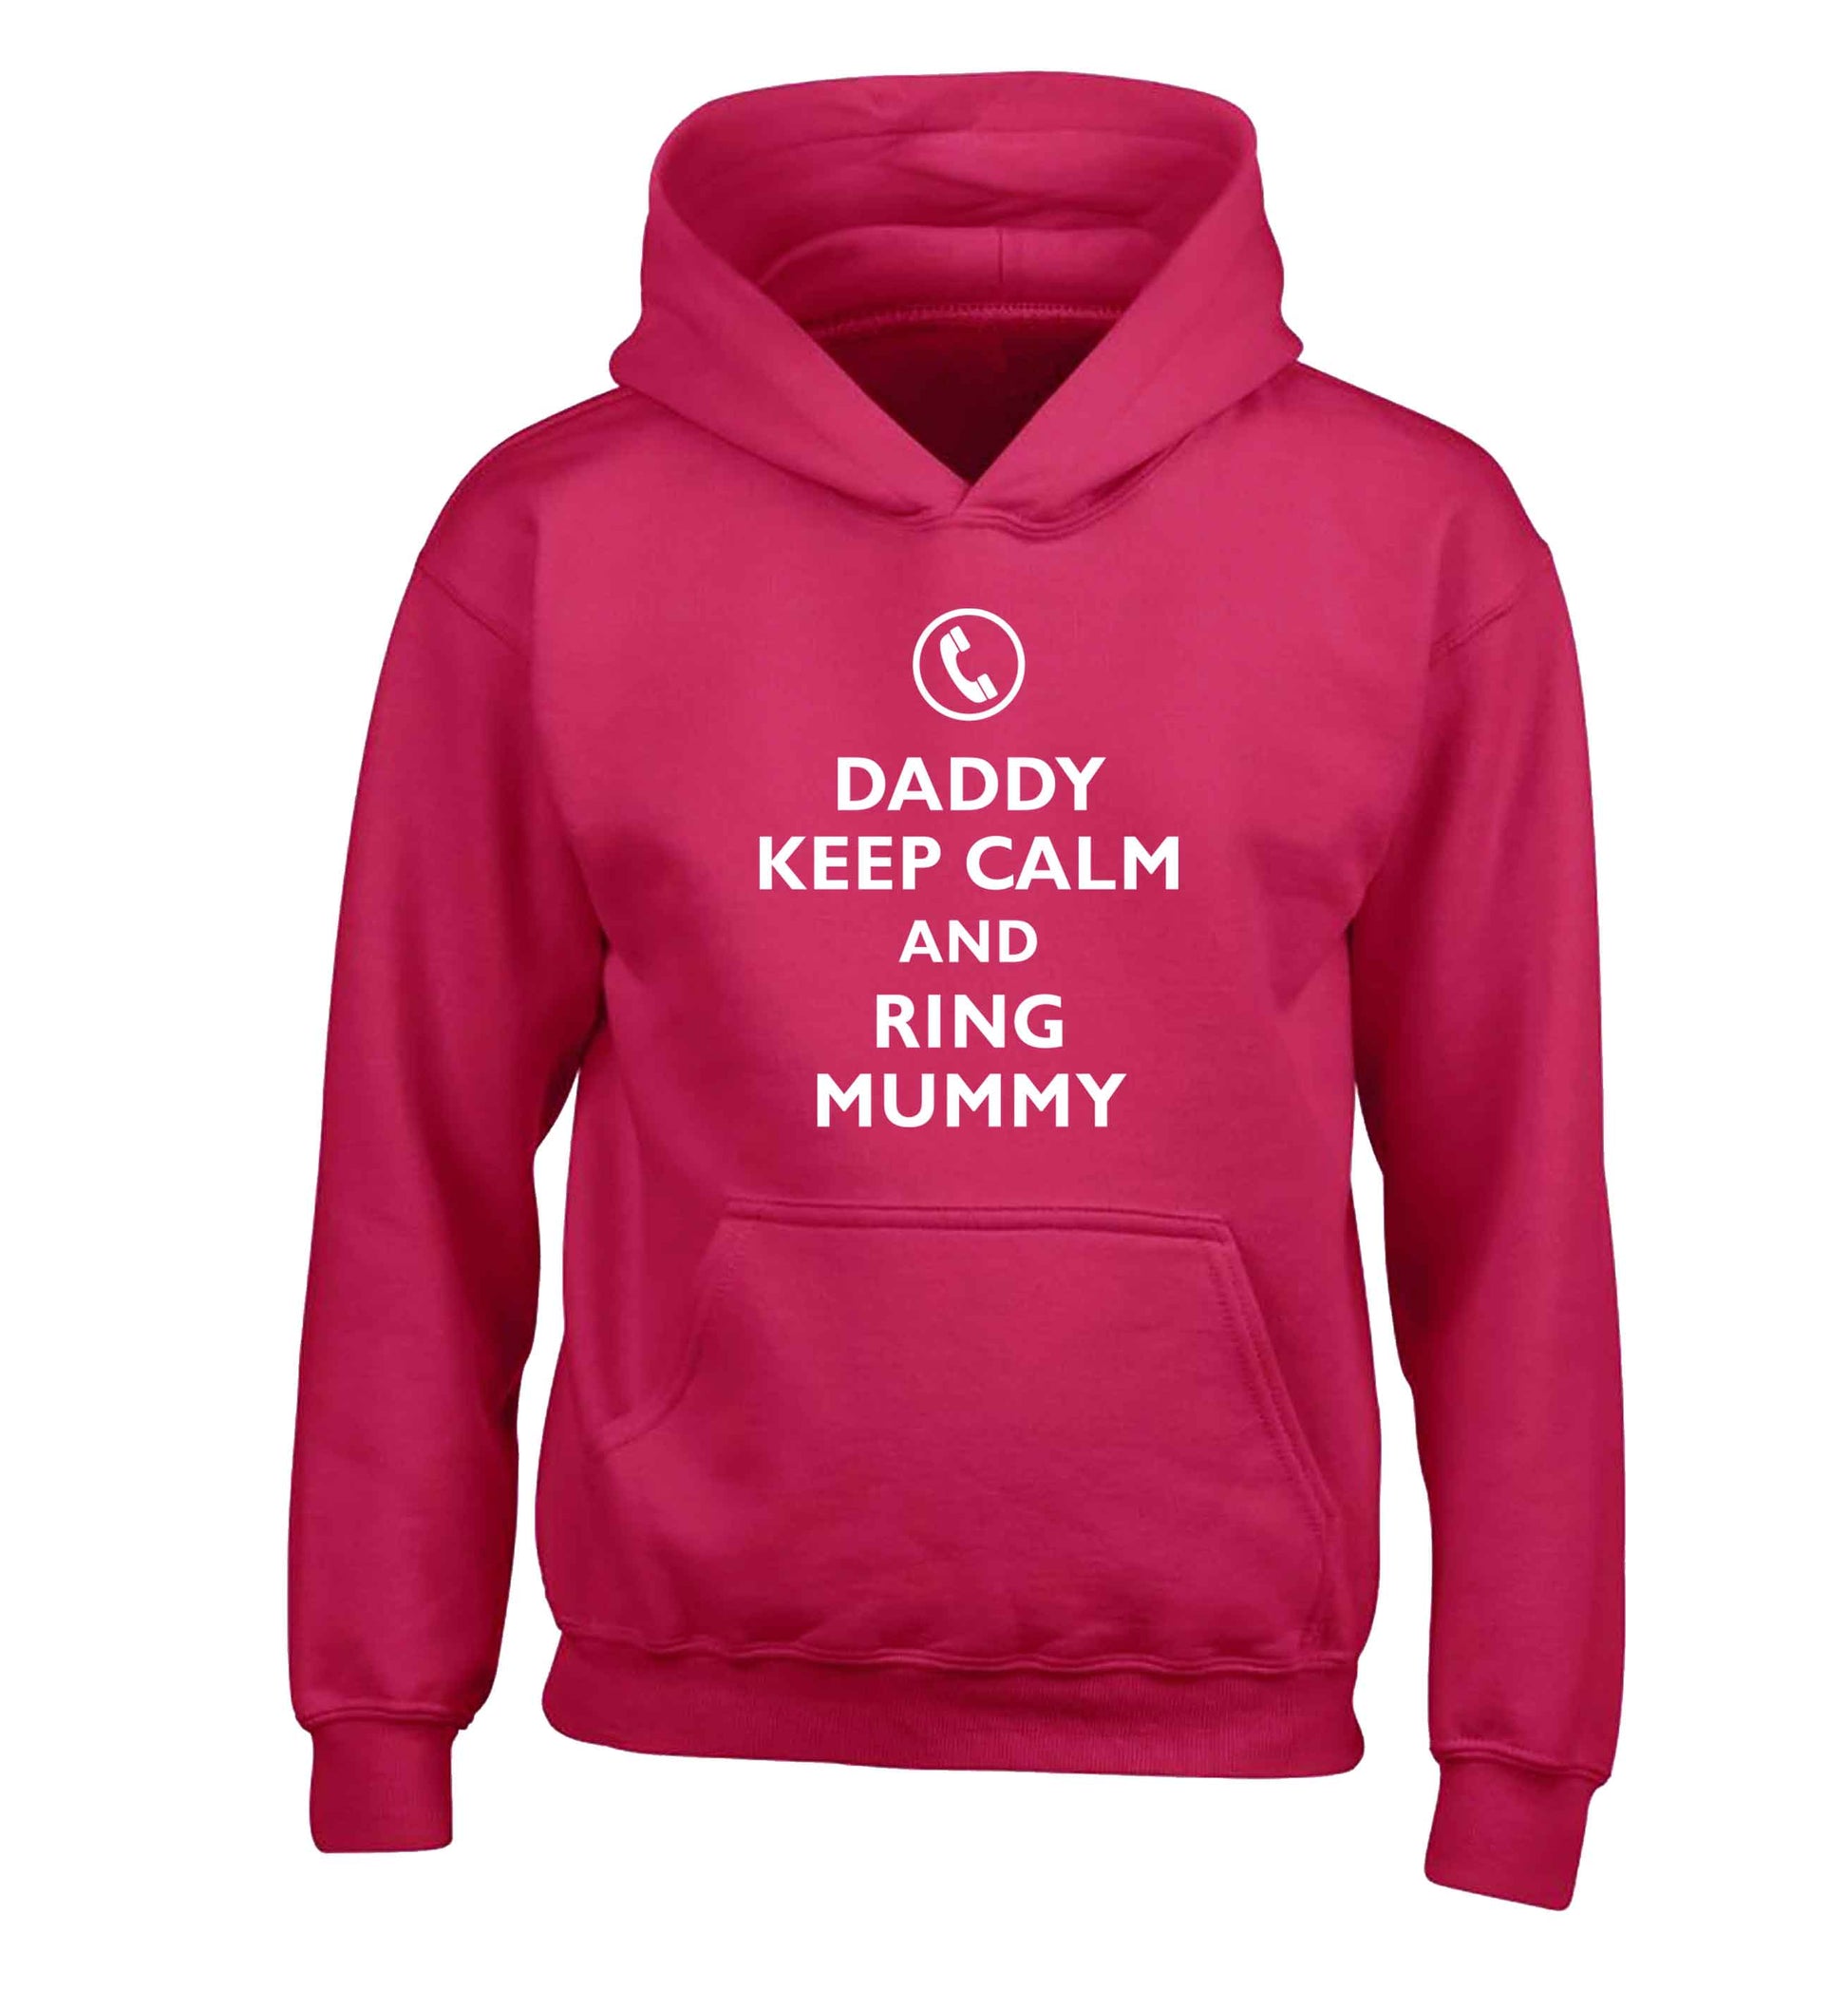 Daddy keep calm and ring mummy children's pink hoodie 12-13 Years